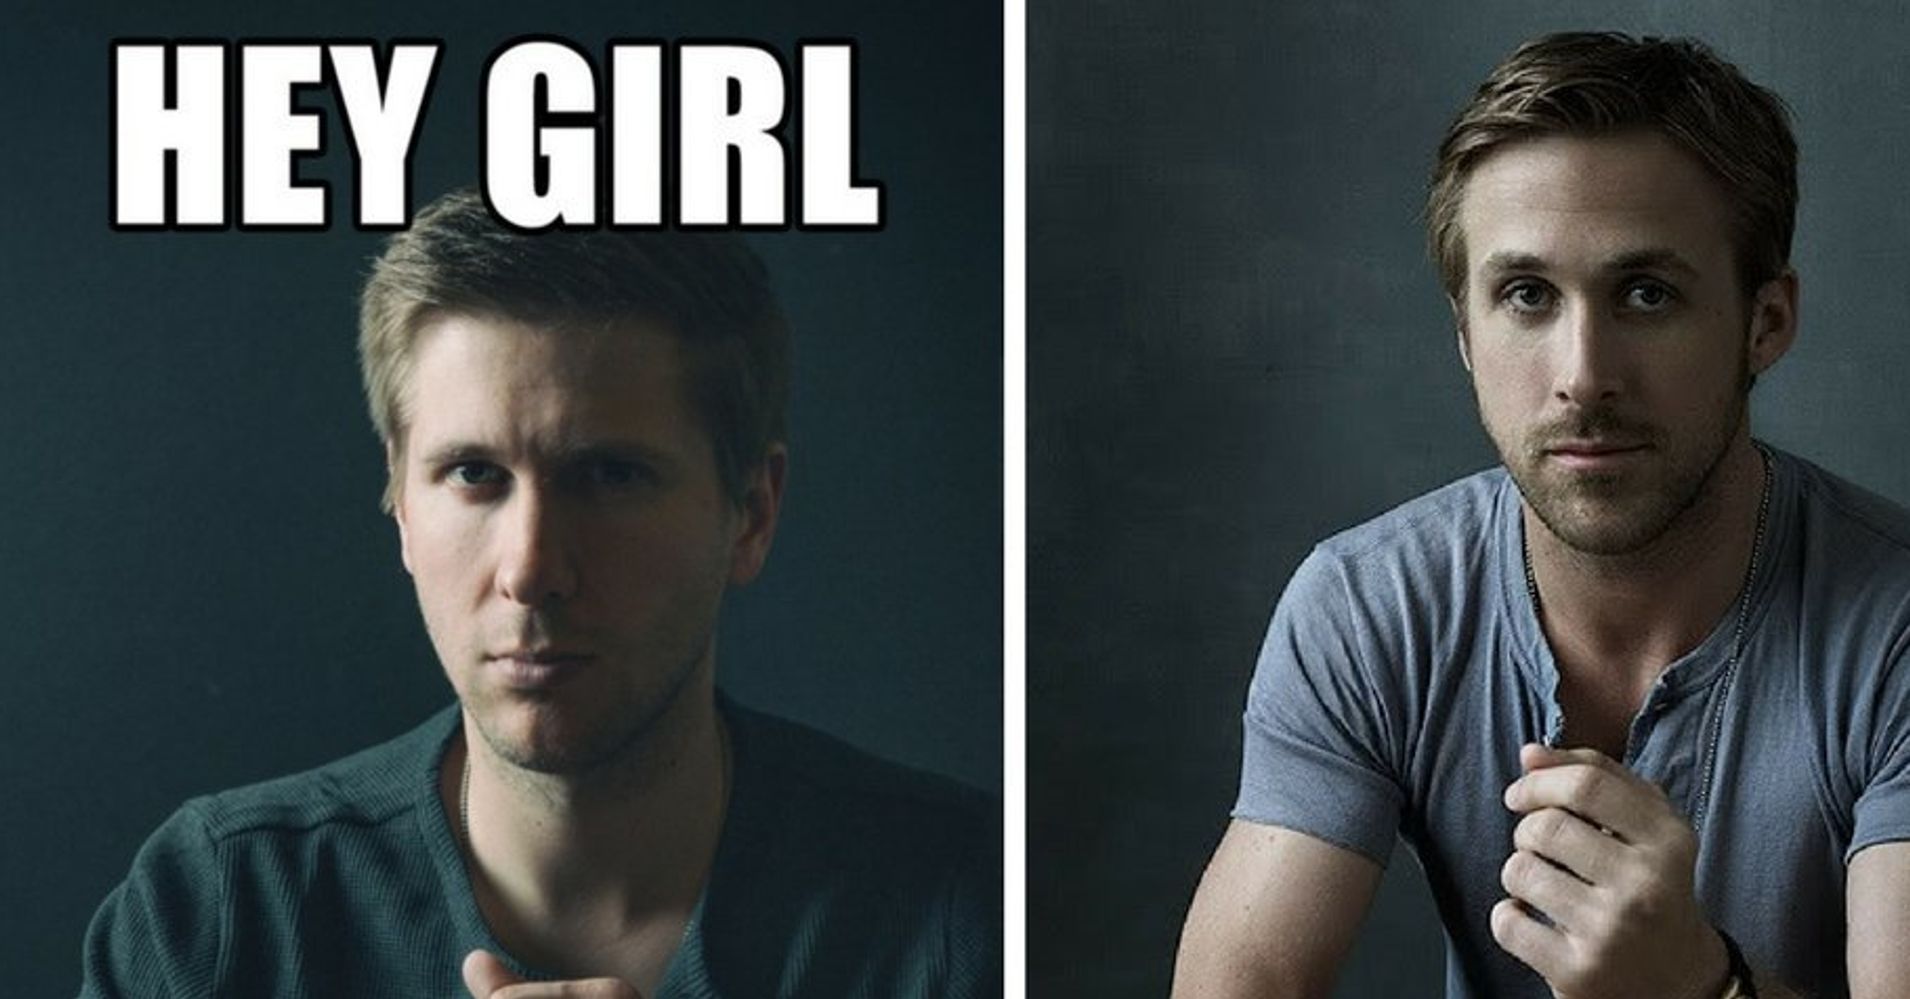 This Ryan Gosling Look Alike Recreated Some Hey Girl Memes For Wife Huffpost 3069